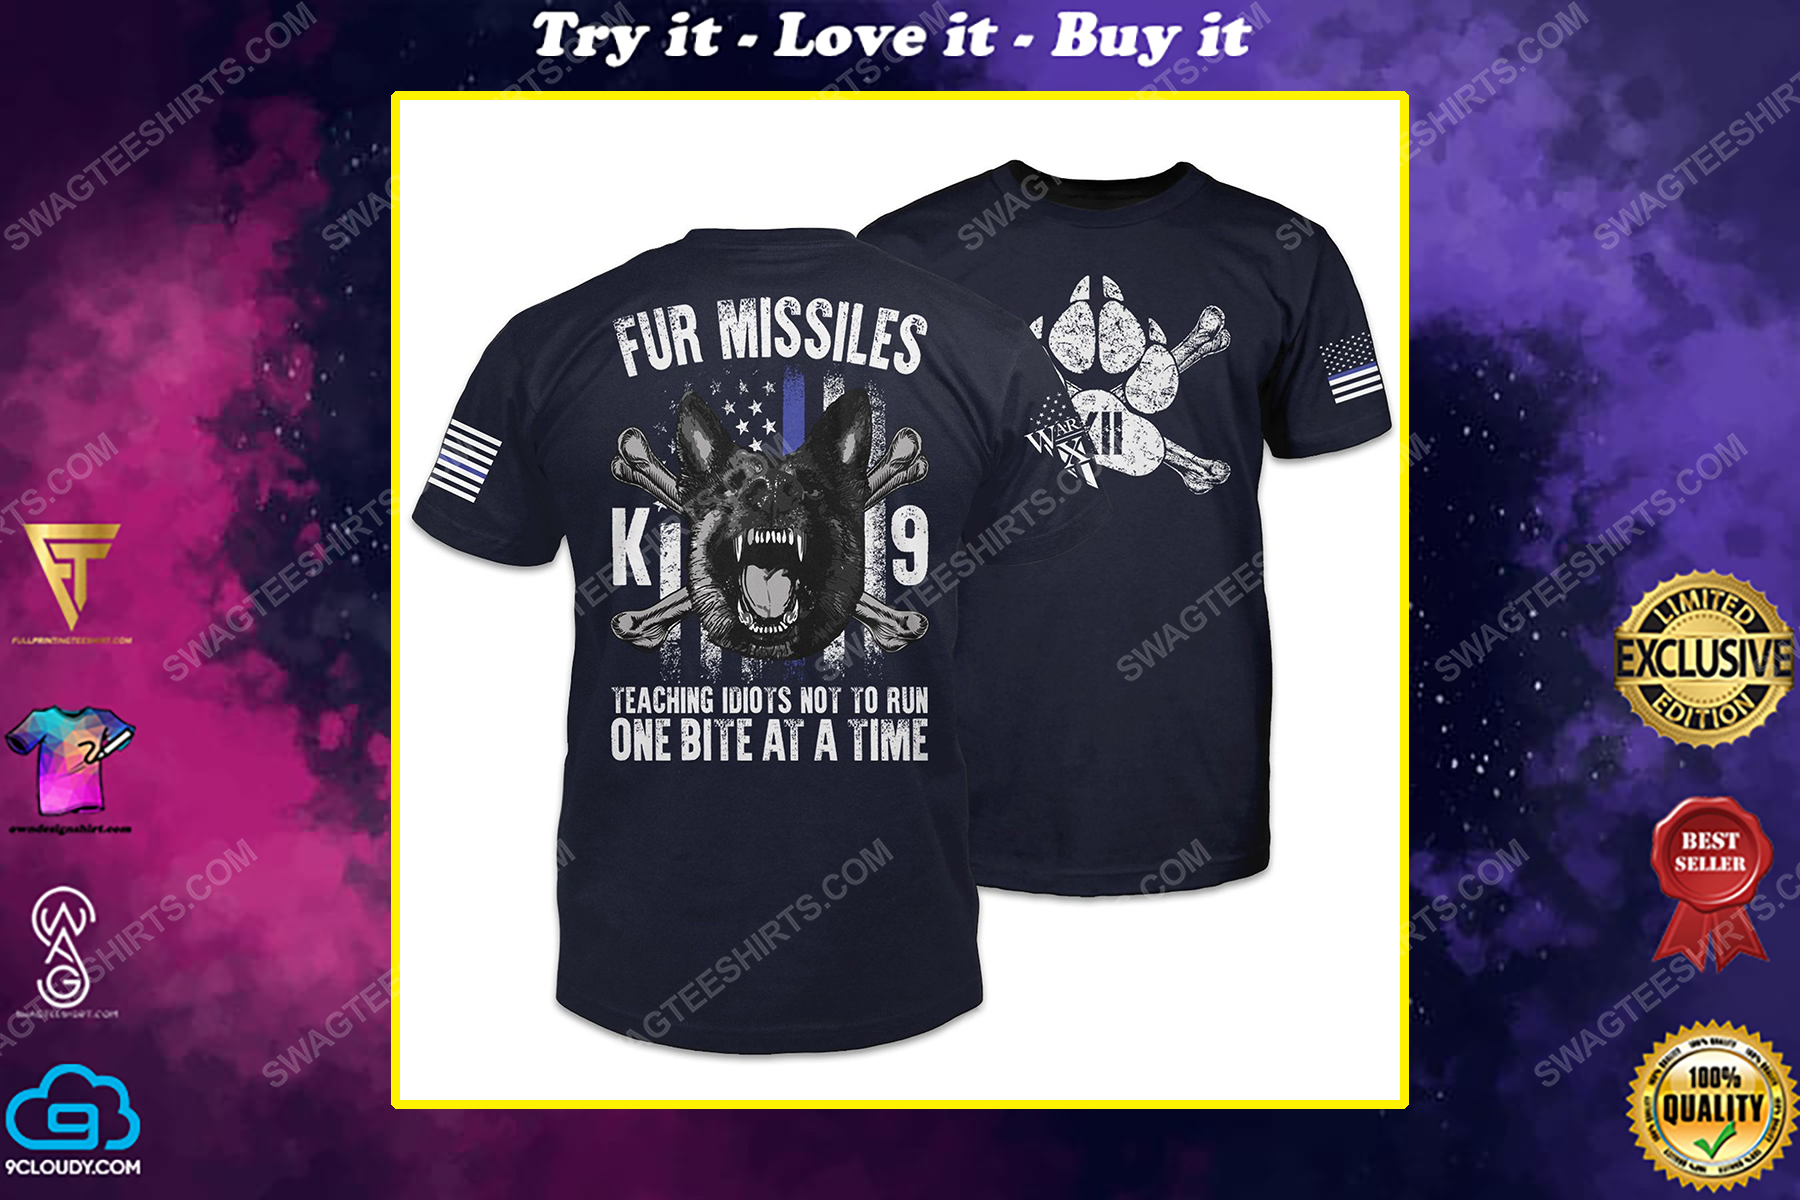 Fur missiles teaching idiots not to run one bite at a time police k9 shirt